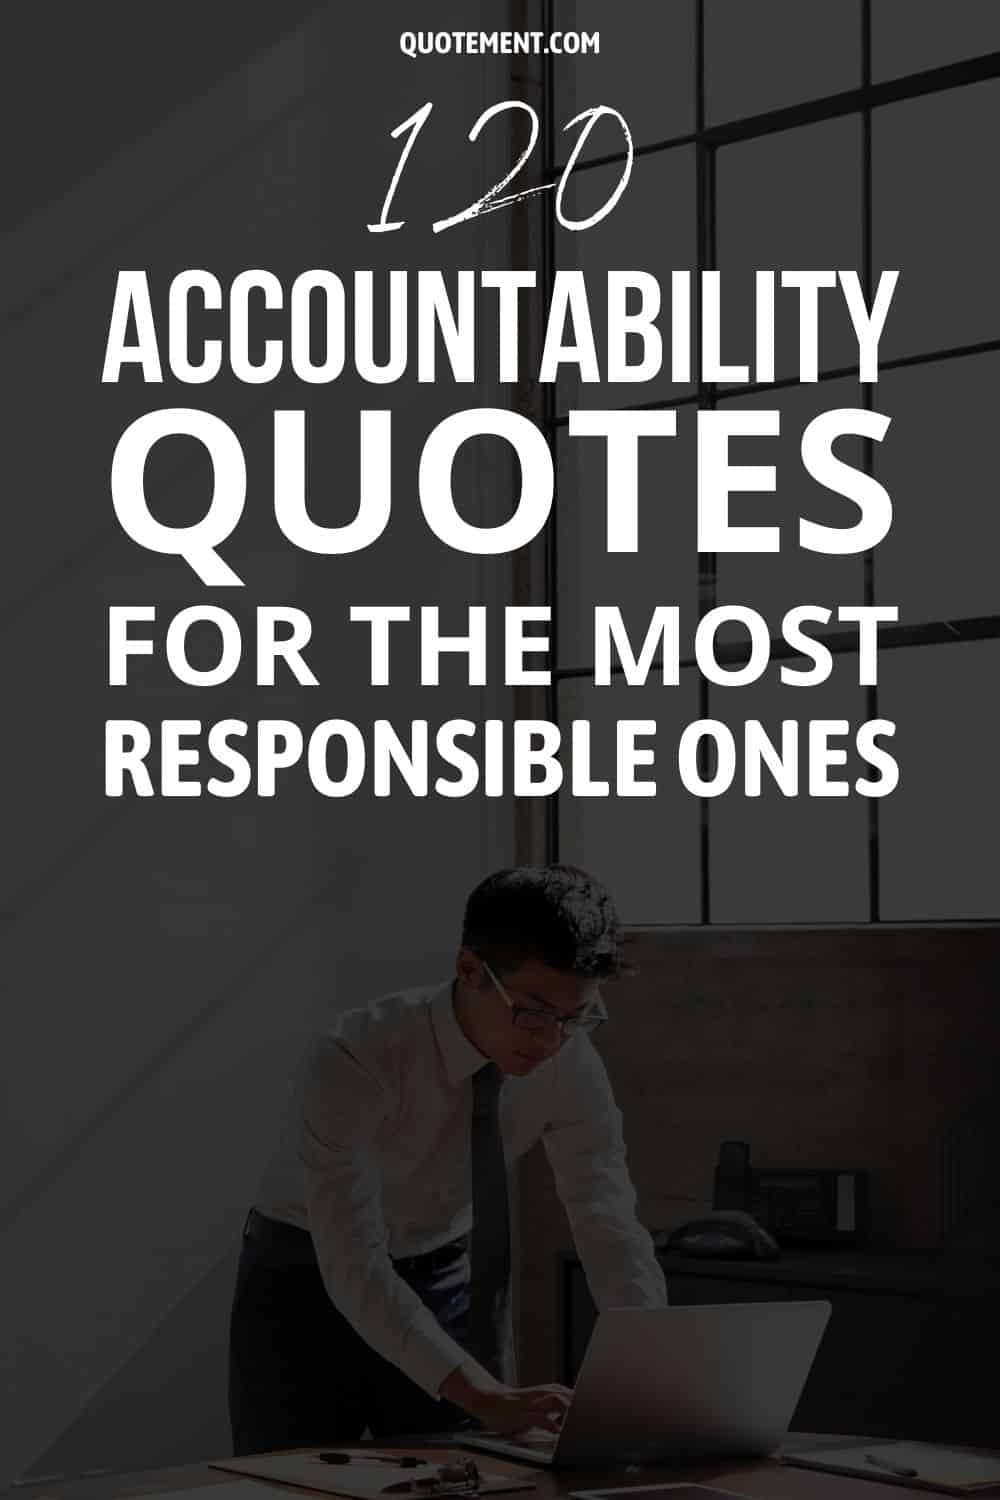 120 Accountability Quotes For The Most Responsible Ones 